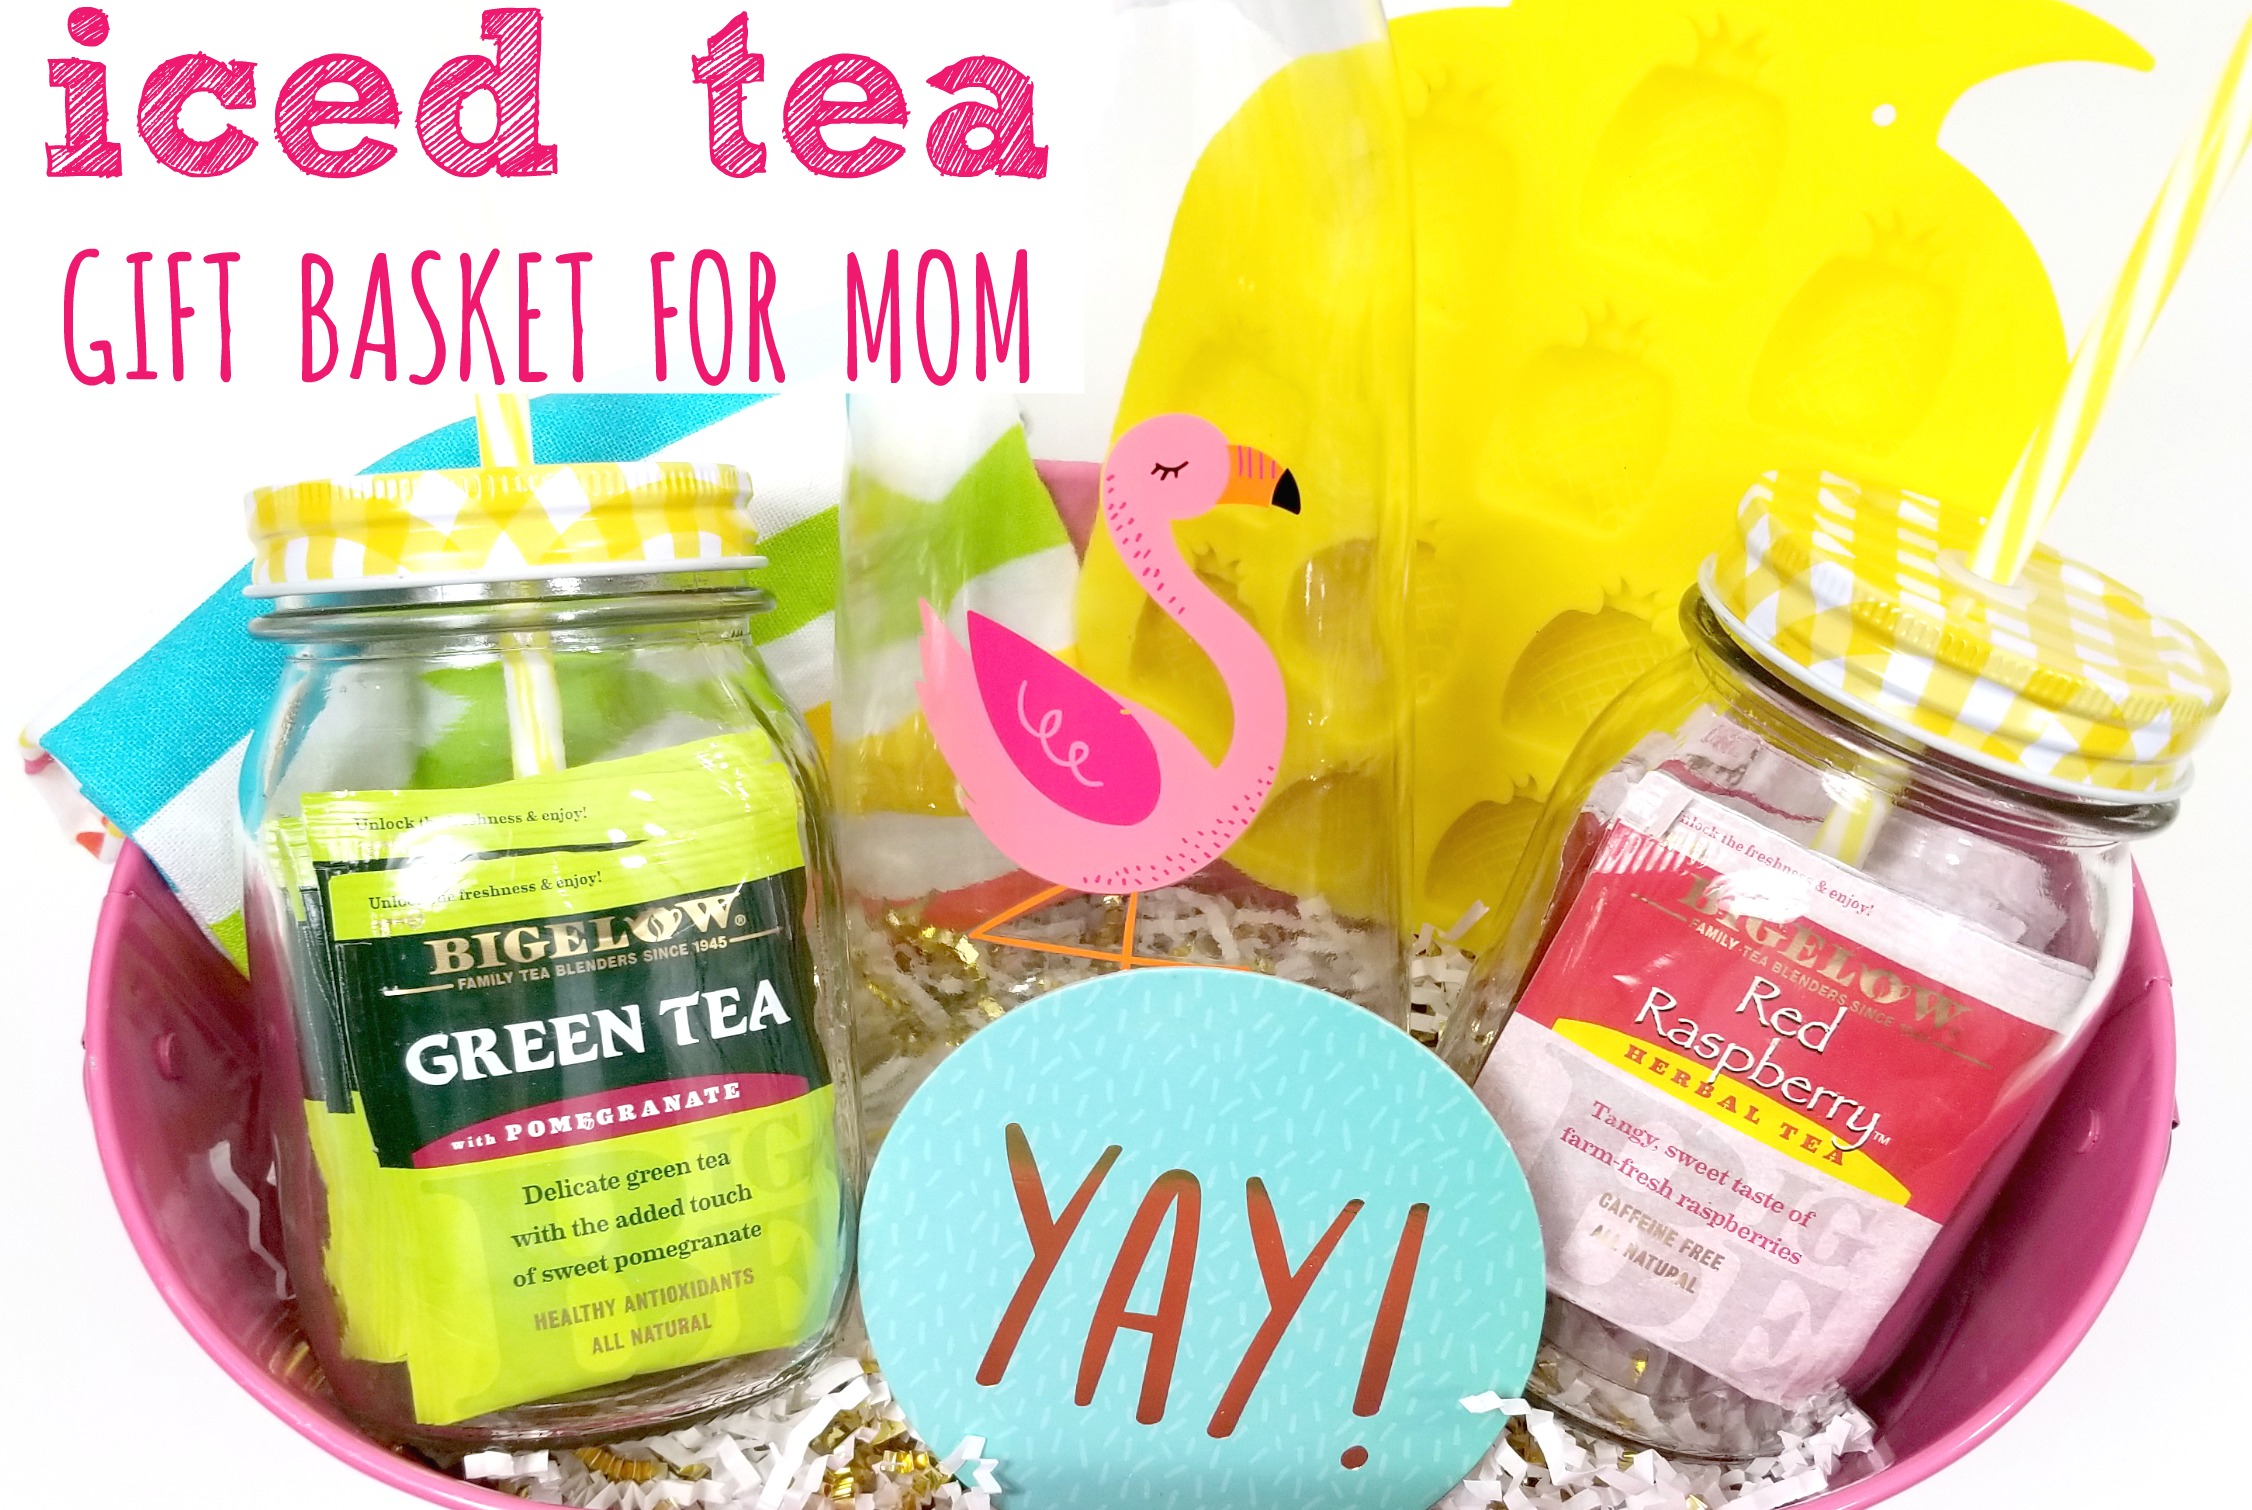  Gifts For Mom - Mom Gifts Tea Set, Gift Basket For